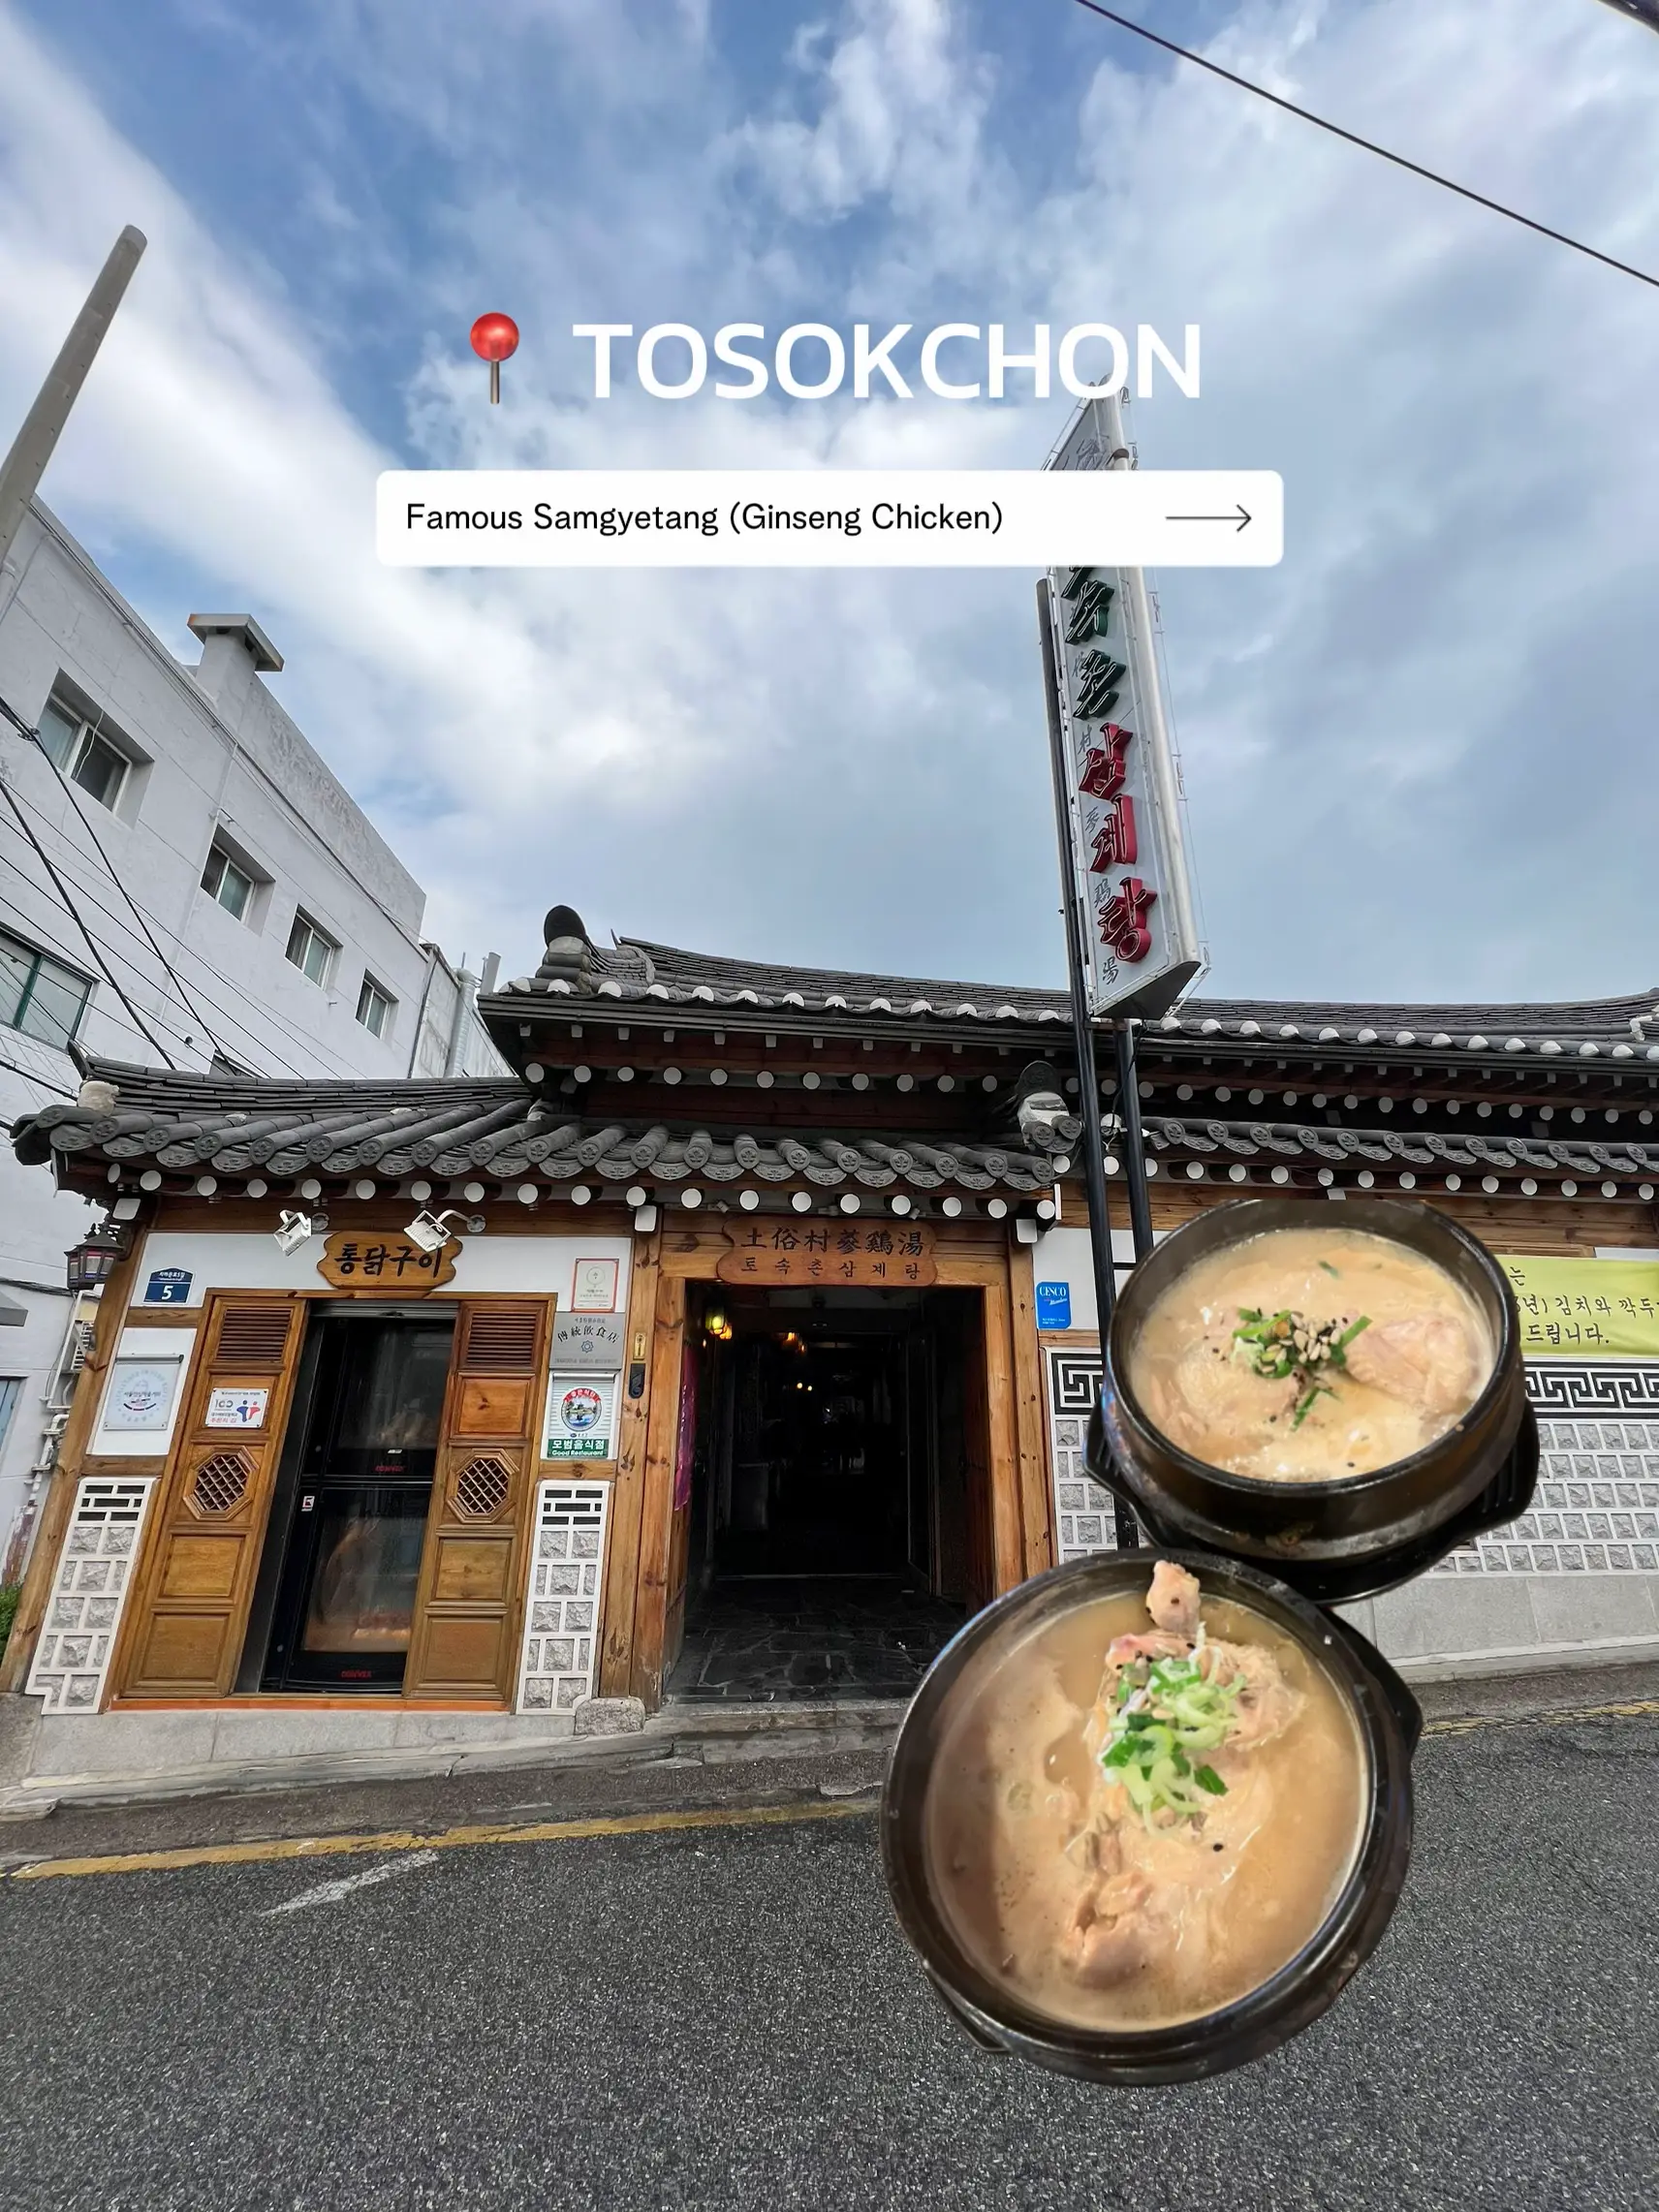 MUST-EAT places in Seoul  🤤😋's images(2)